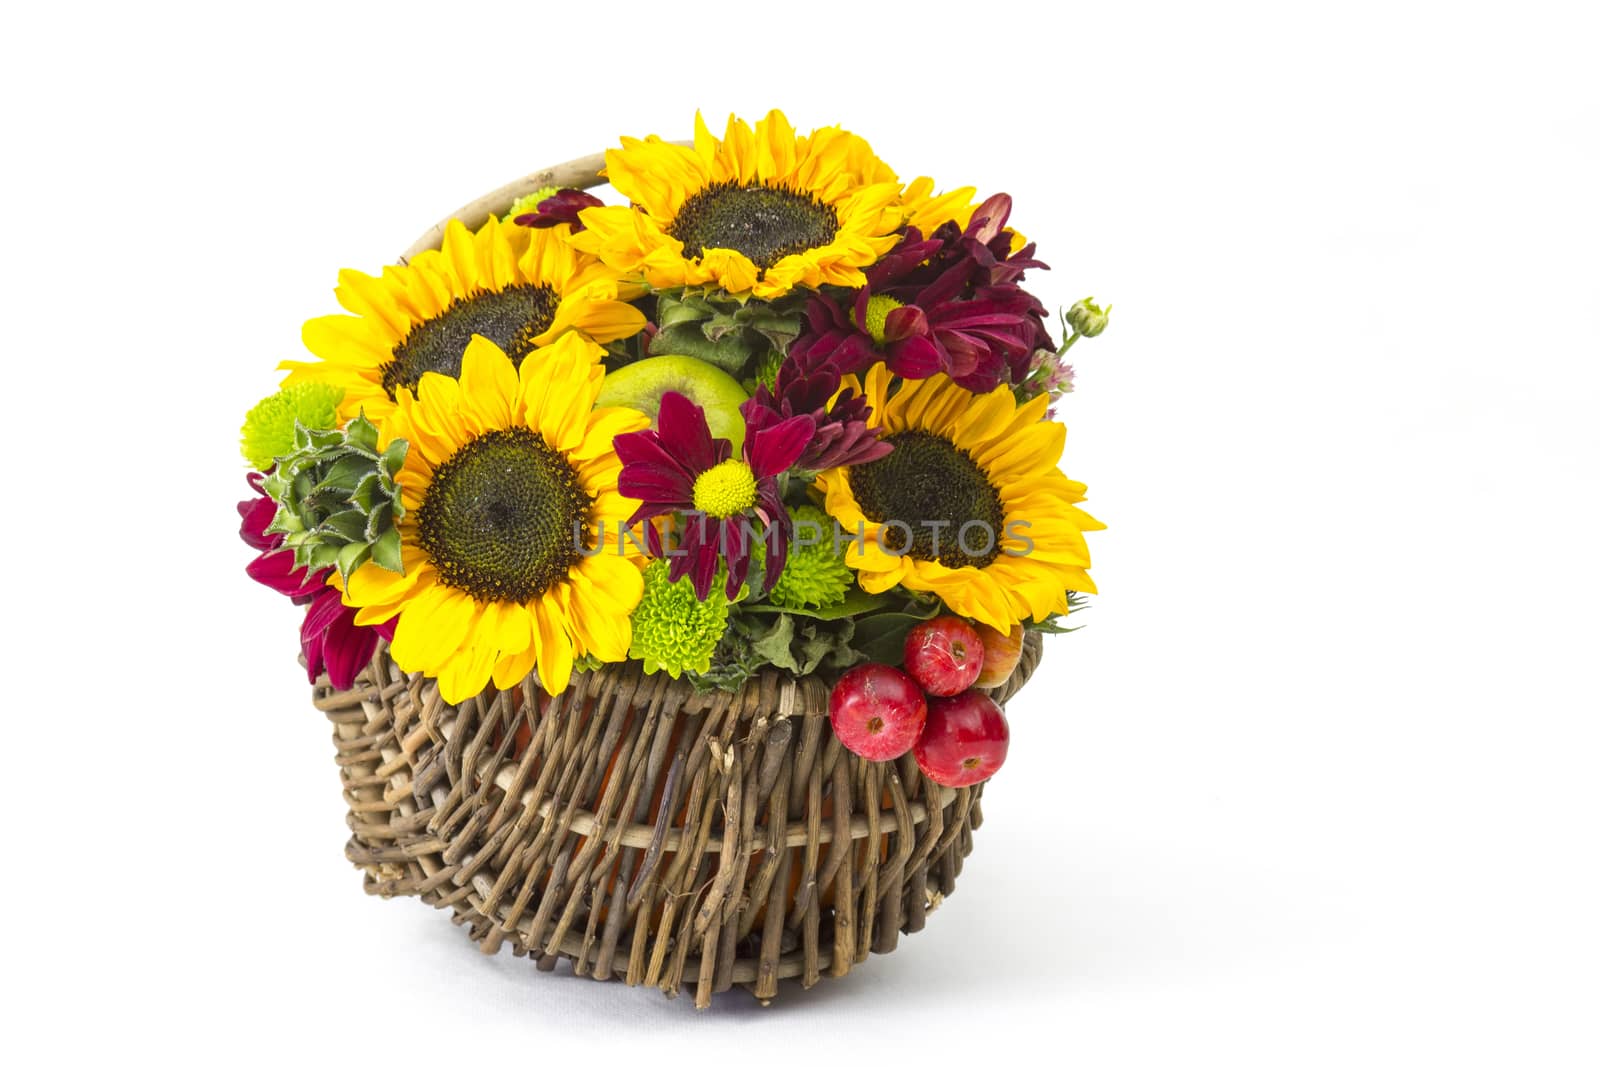 basket with autumnal flowers, berries and apples by miradrozdowski